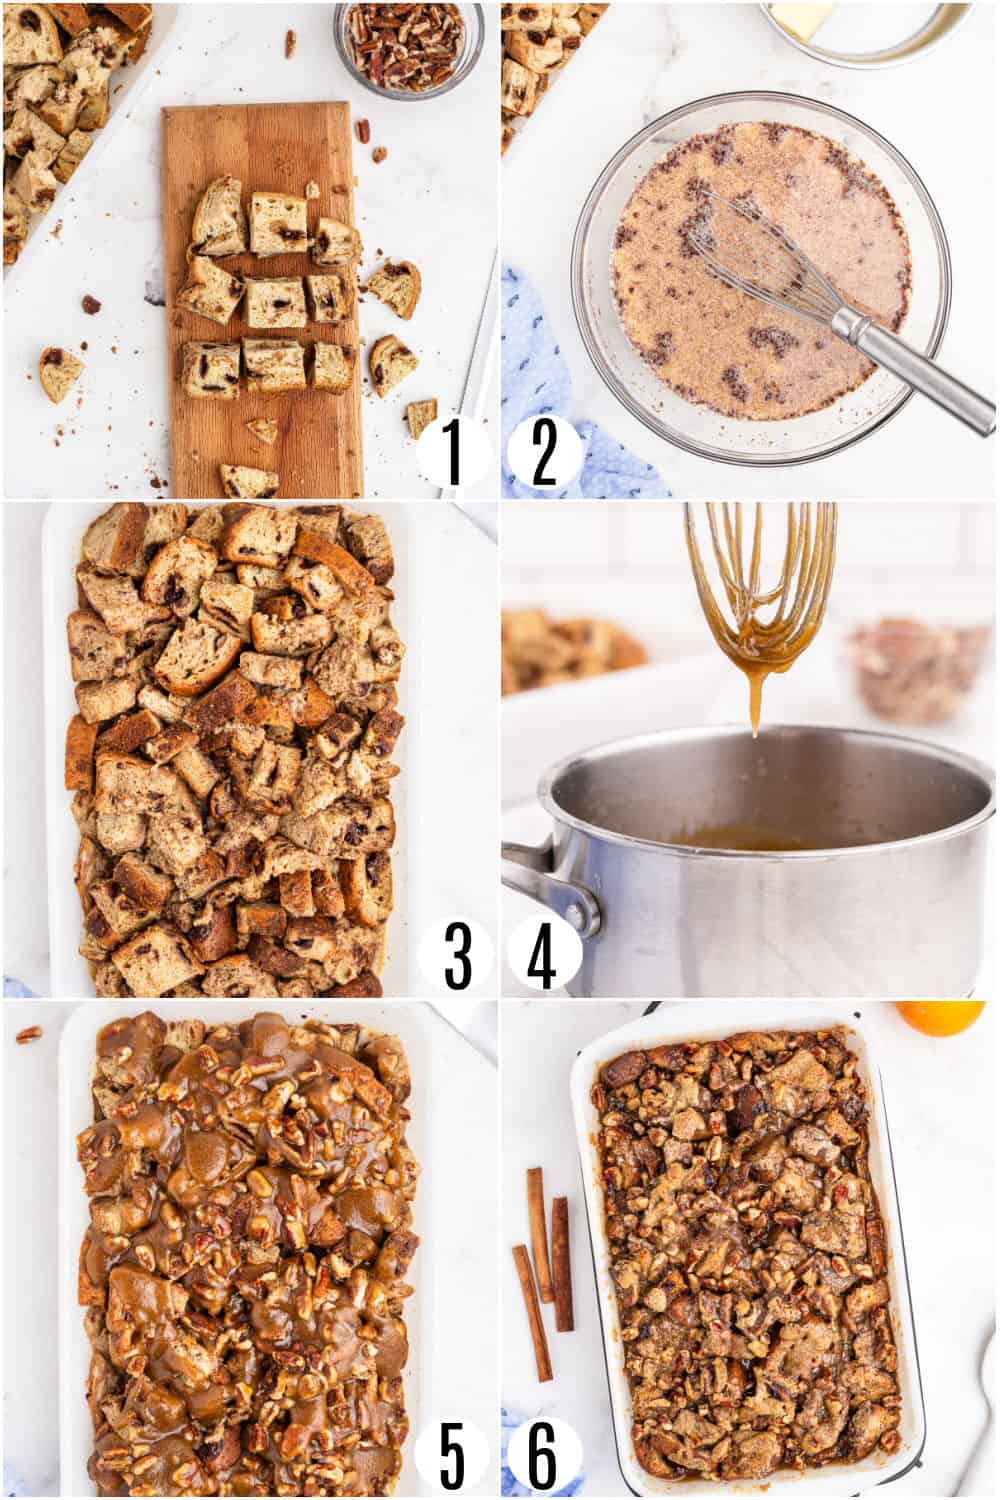 Step by step photos showing how to make overnight french toast casserole.